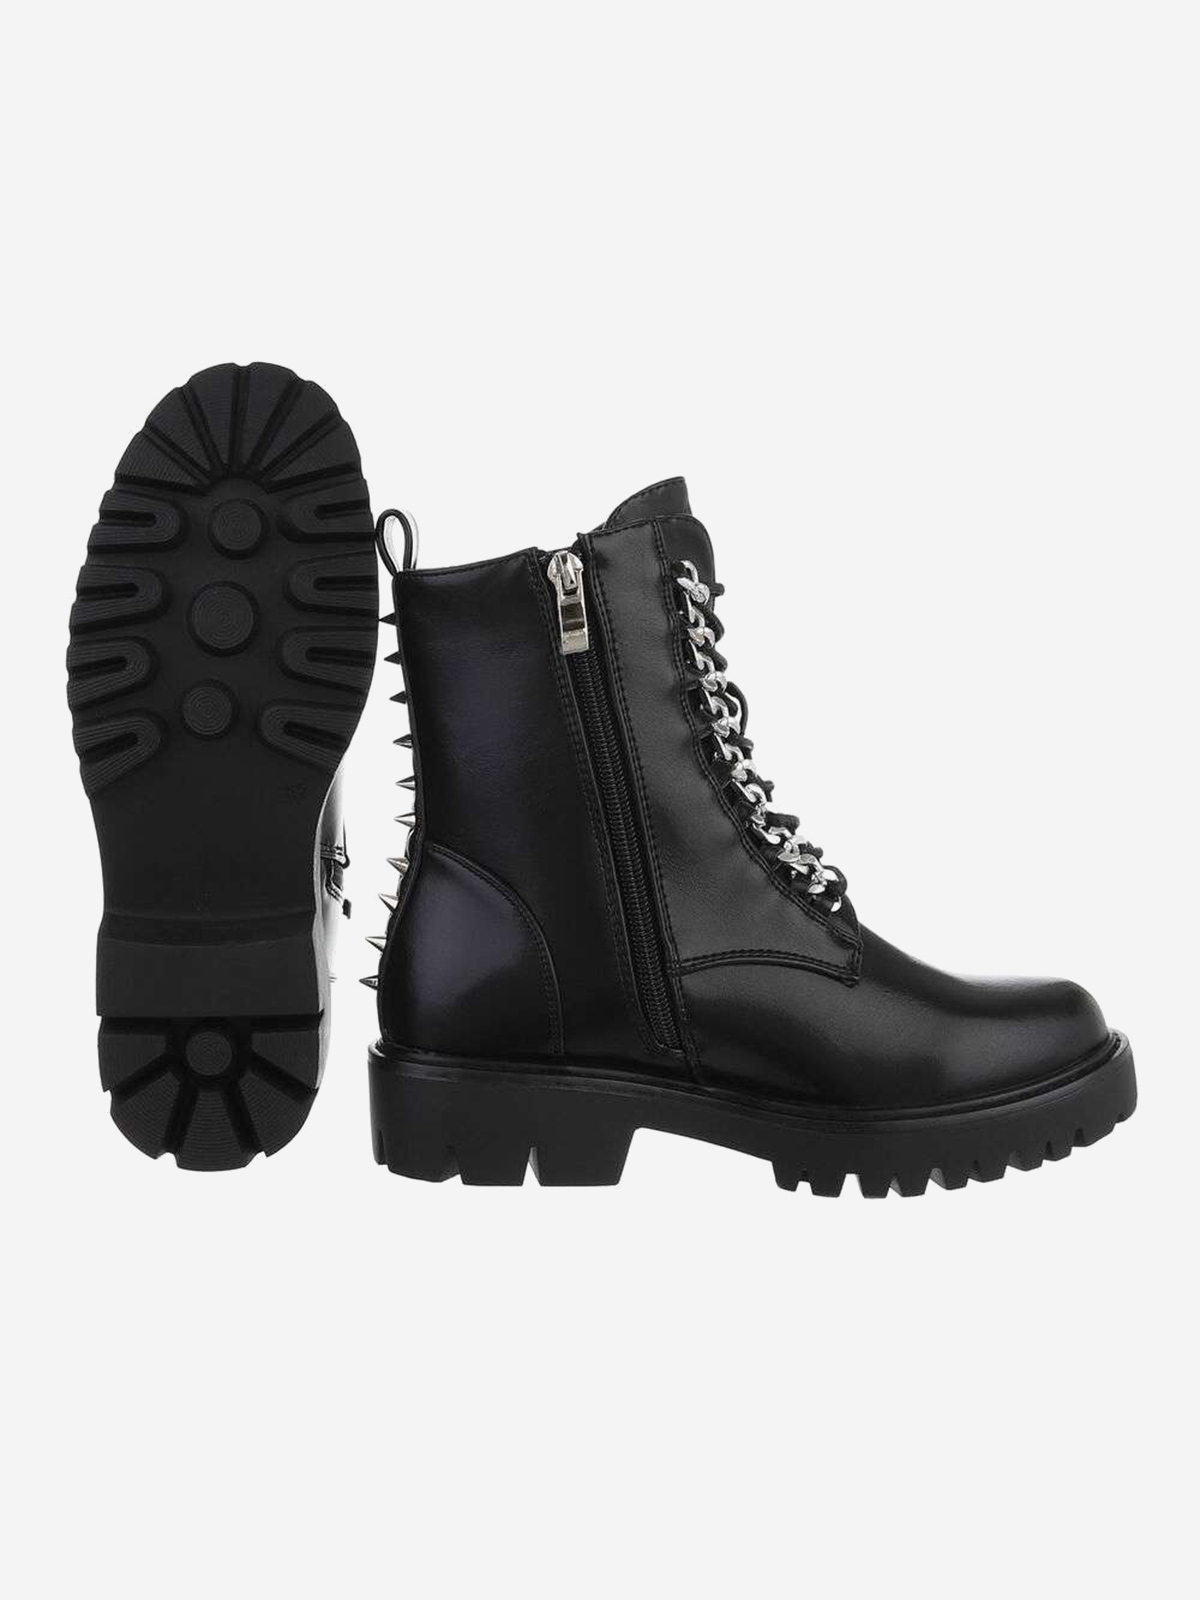 "Punk" style women's ankle boots in black